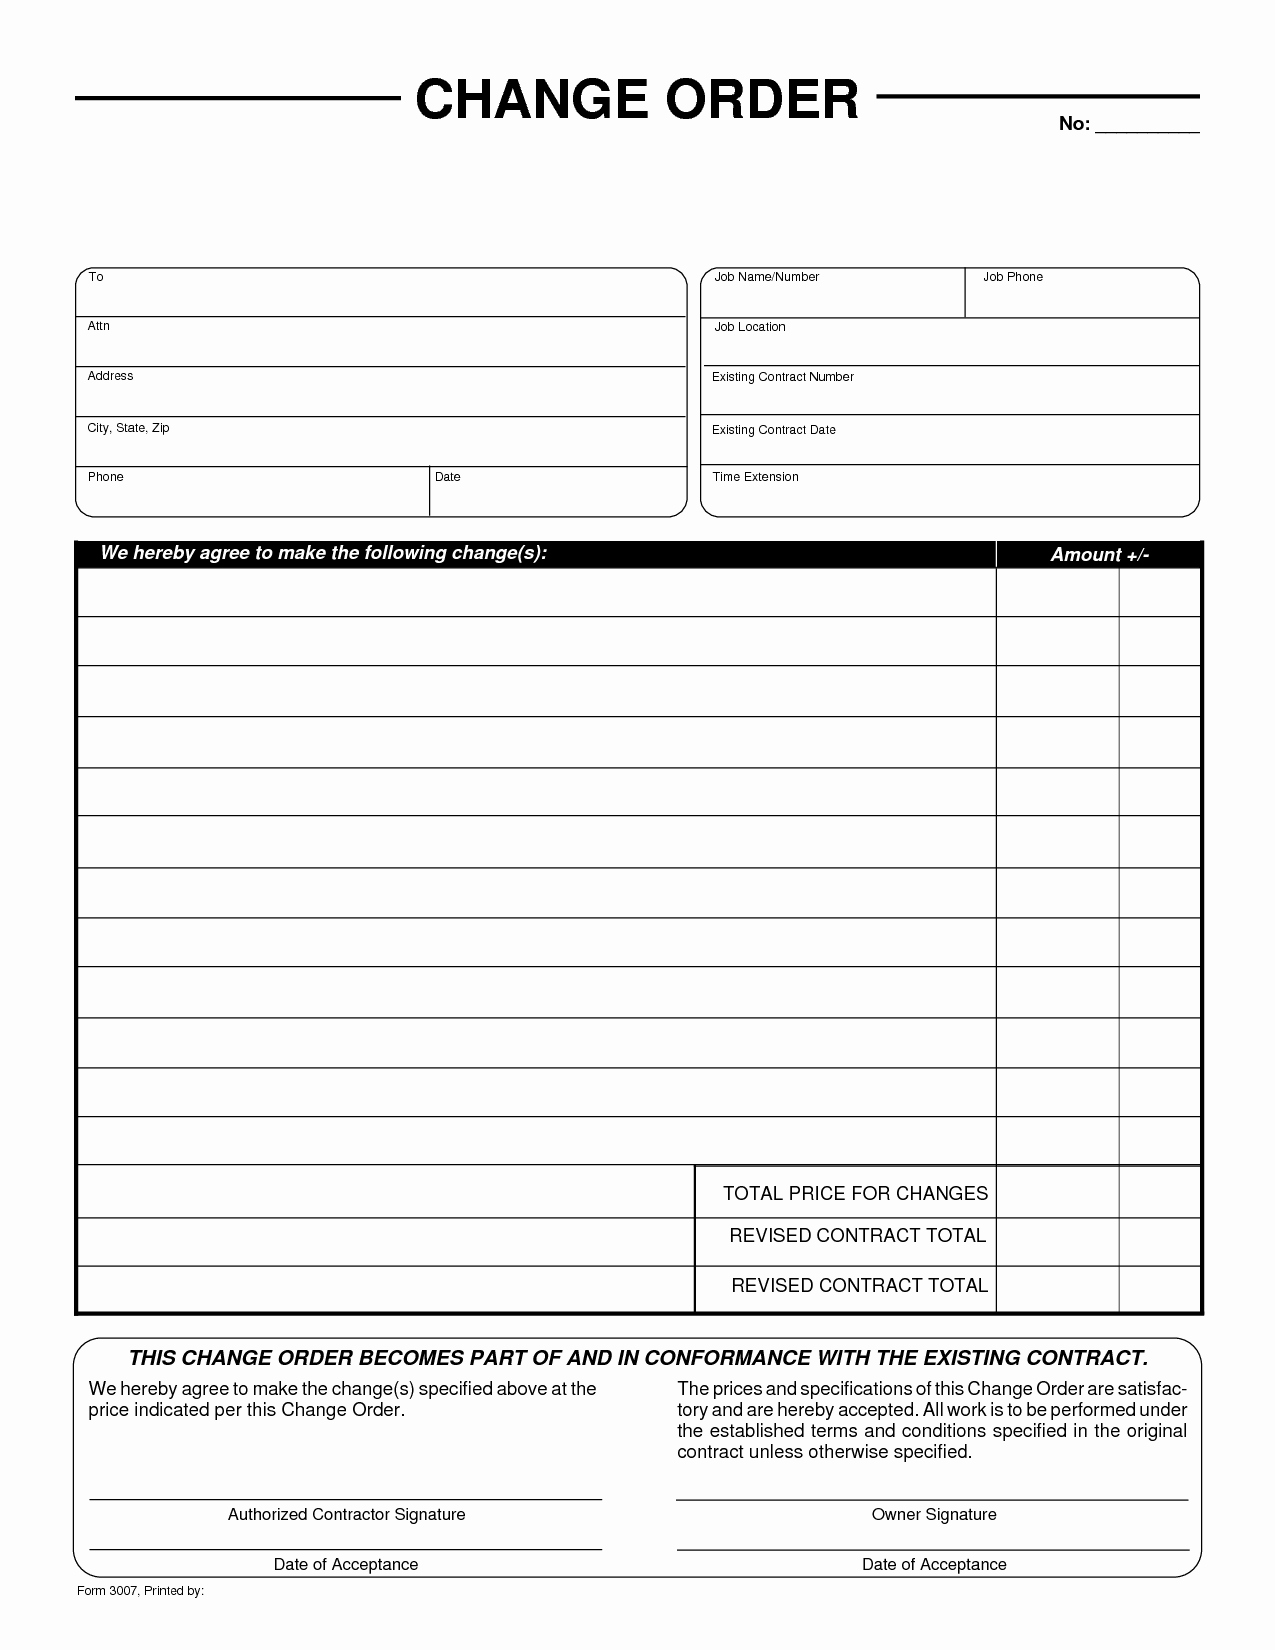 Printable order forms Templates Best Of Change Of order form by Liferetreat Change order form